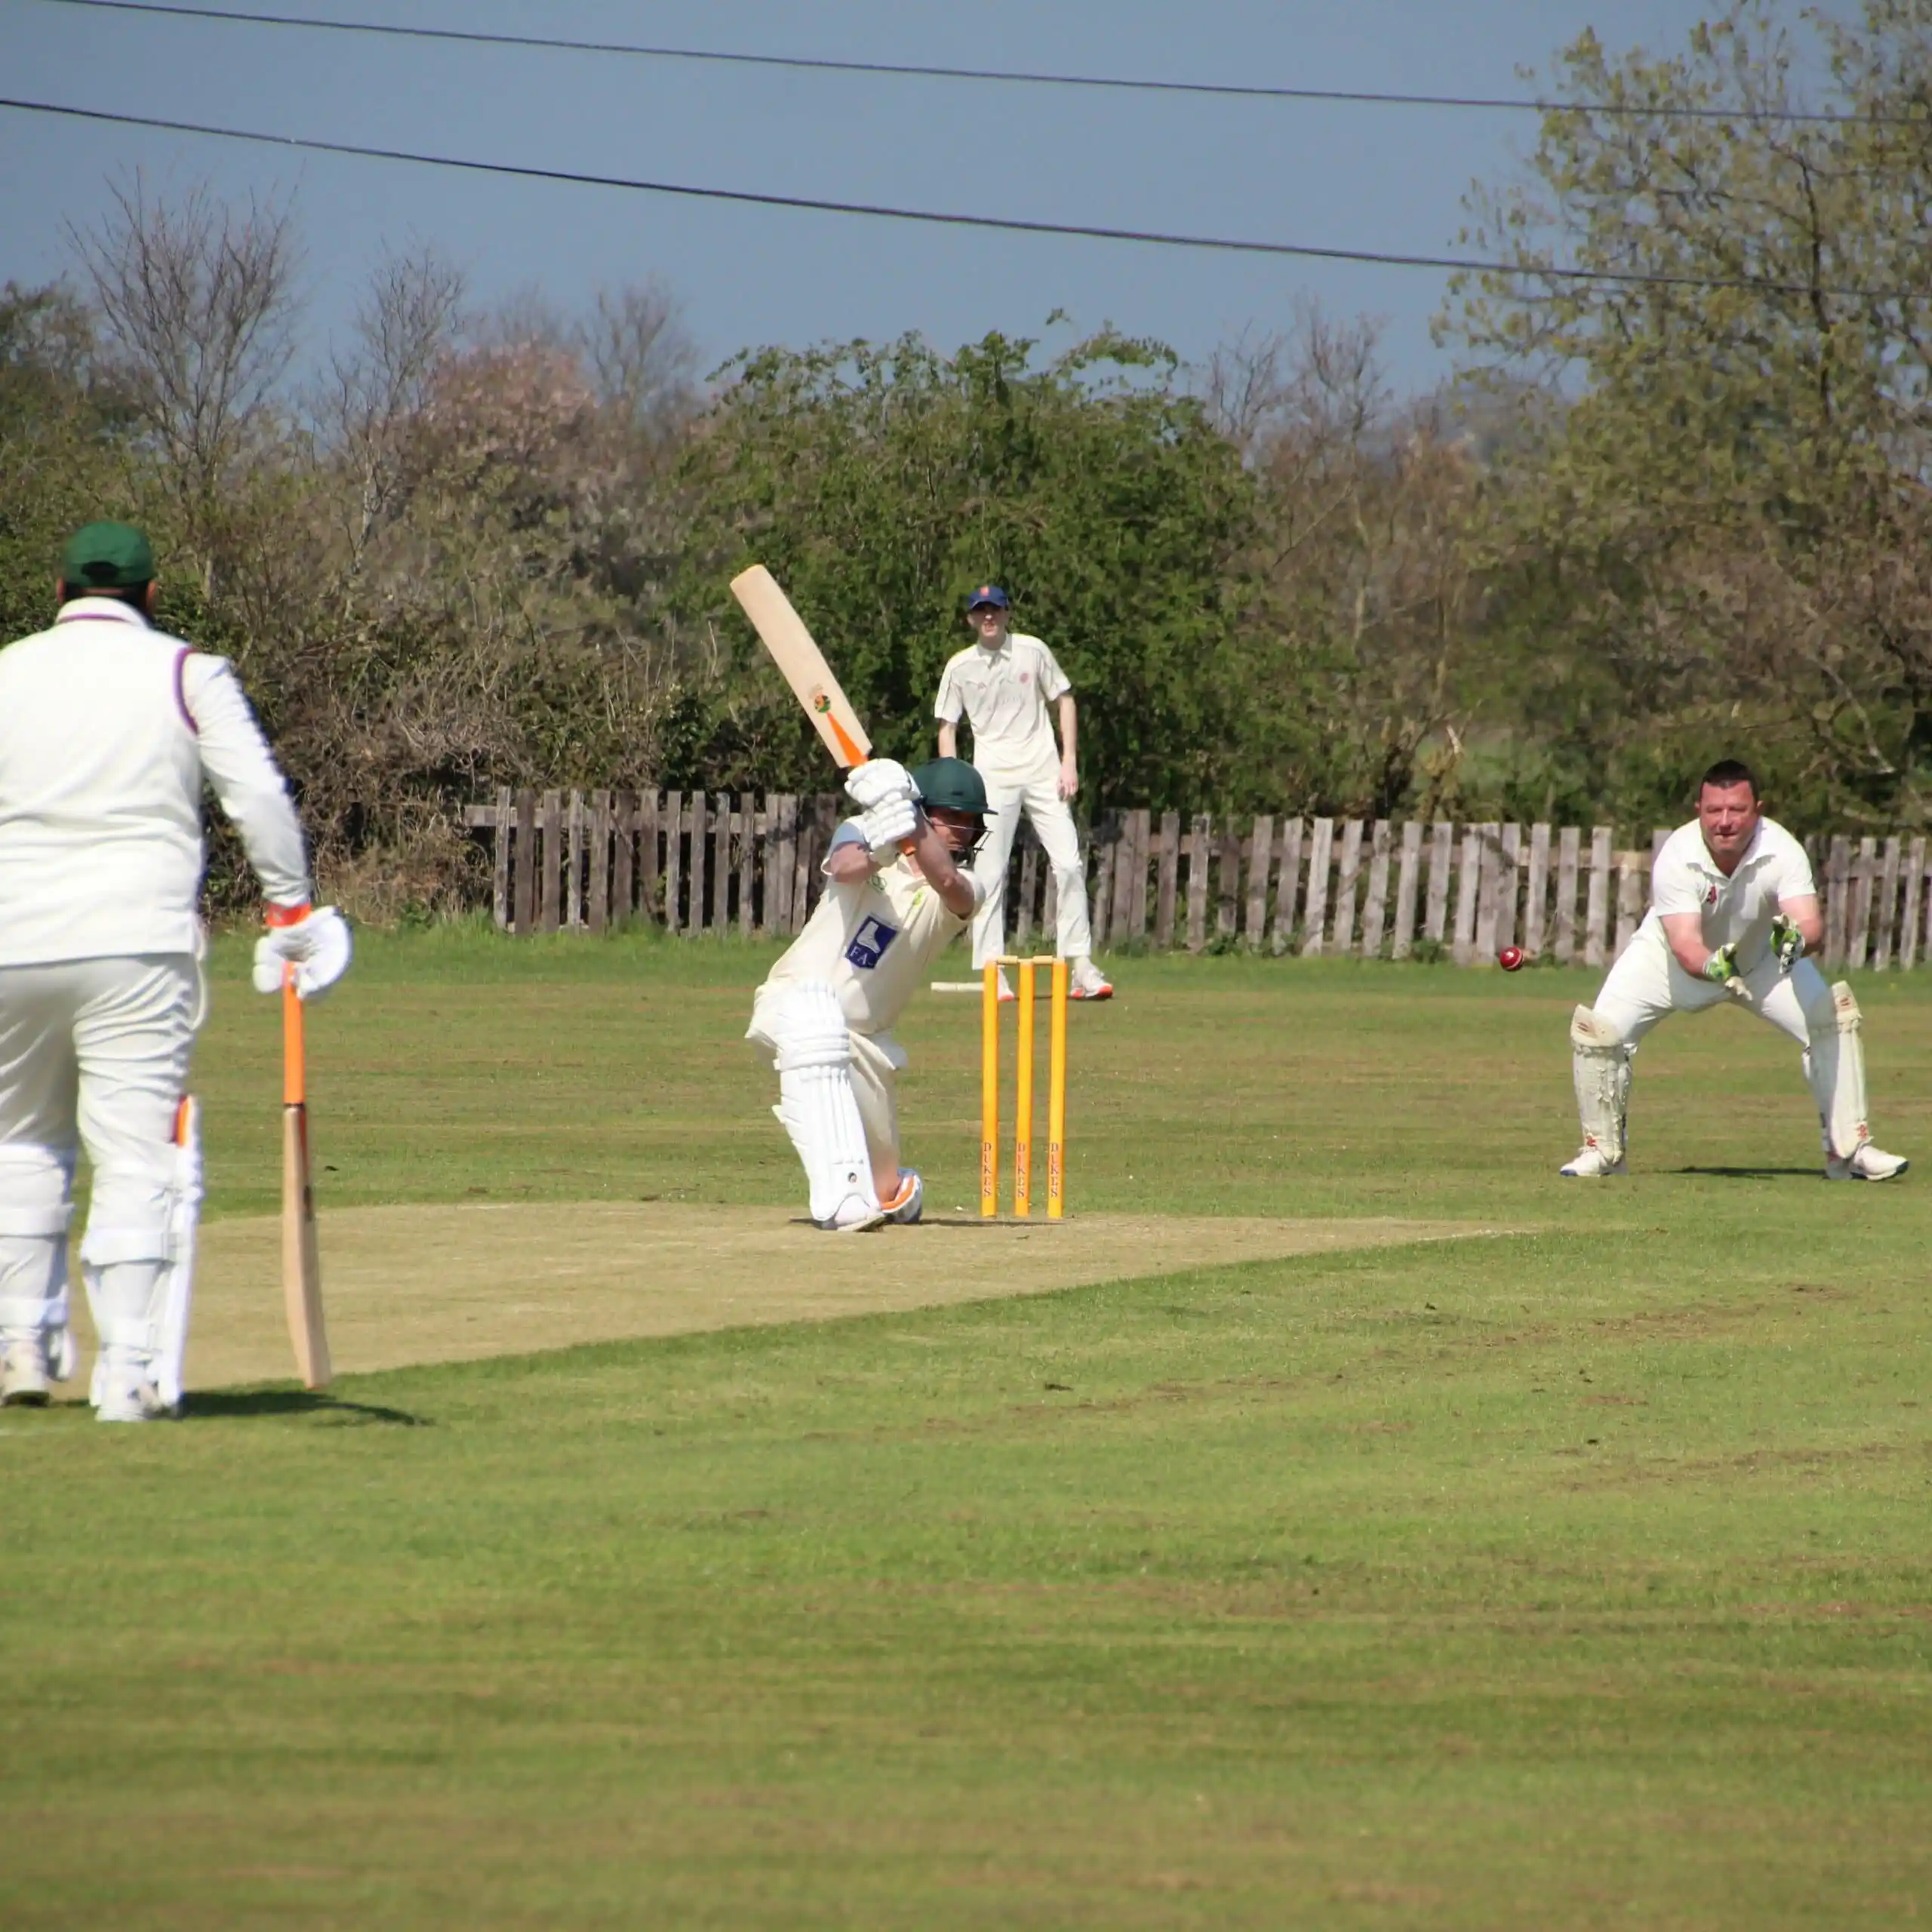 Our cheap cricket bat in action